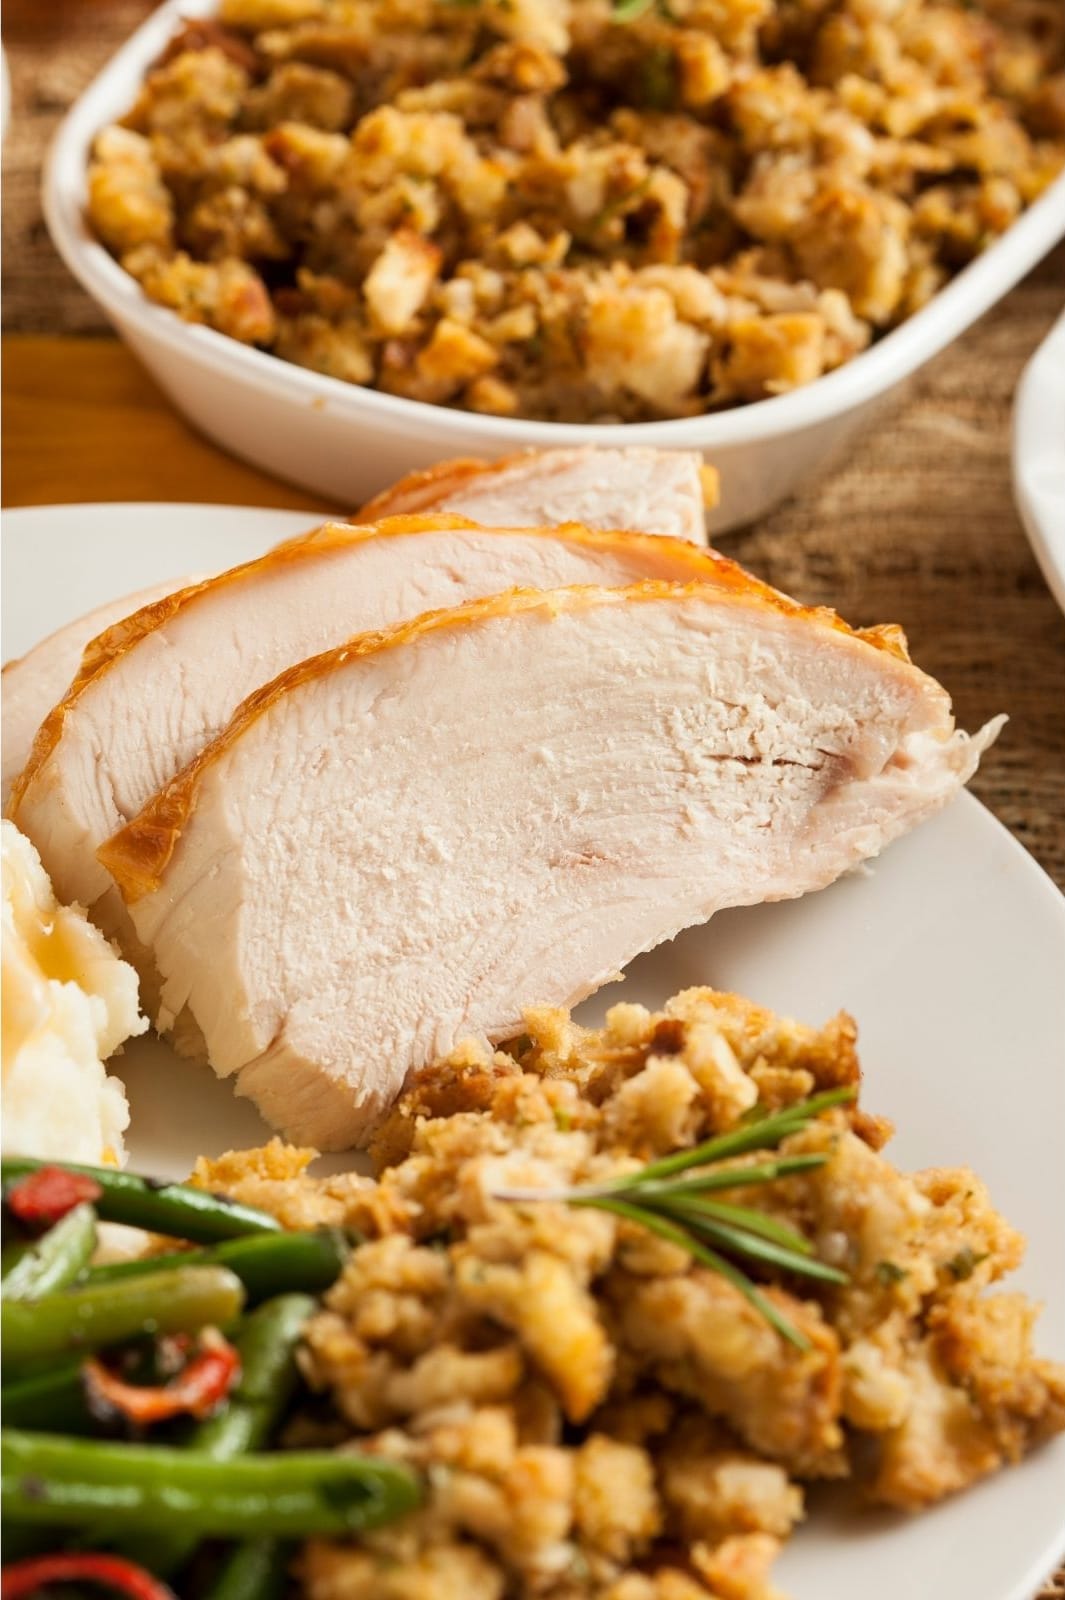 sliced turkey with stuffing on a white plate